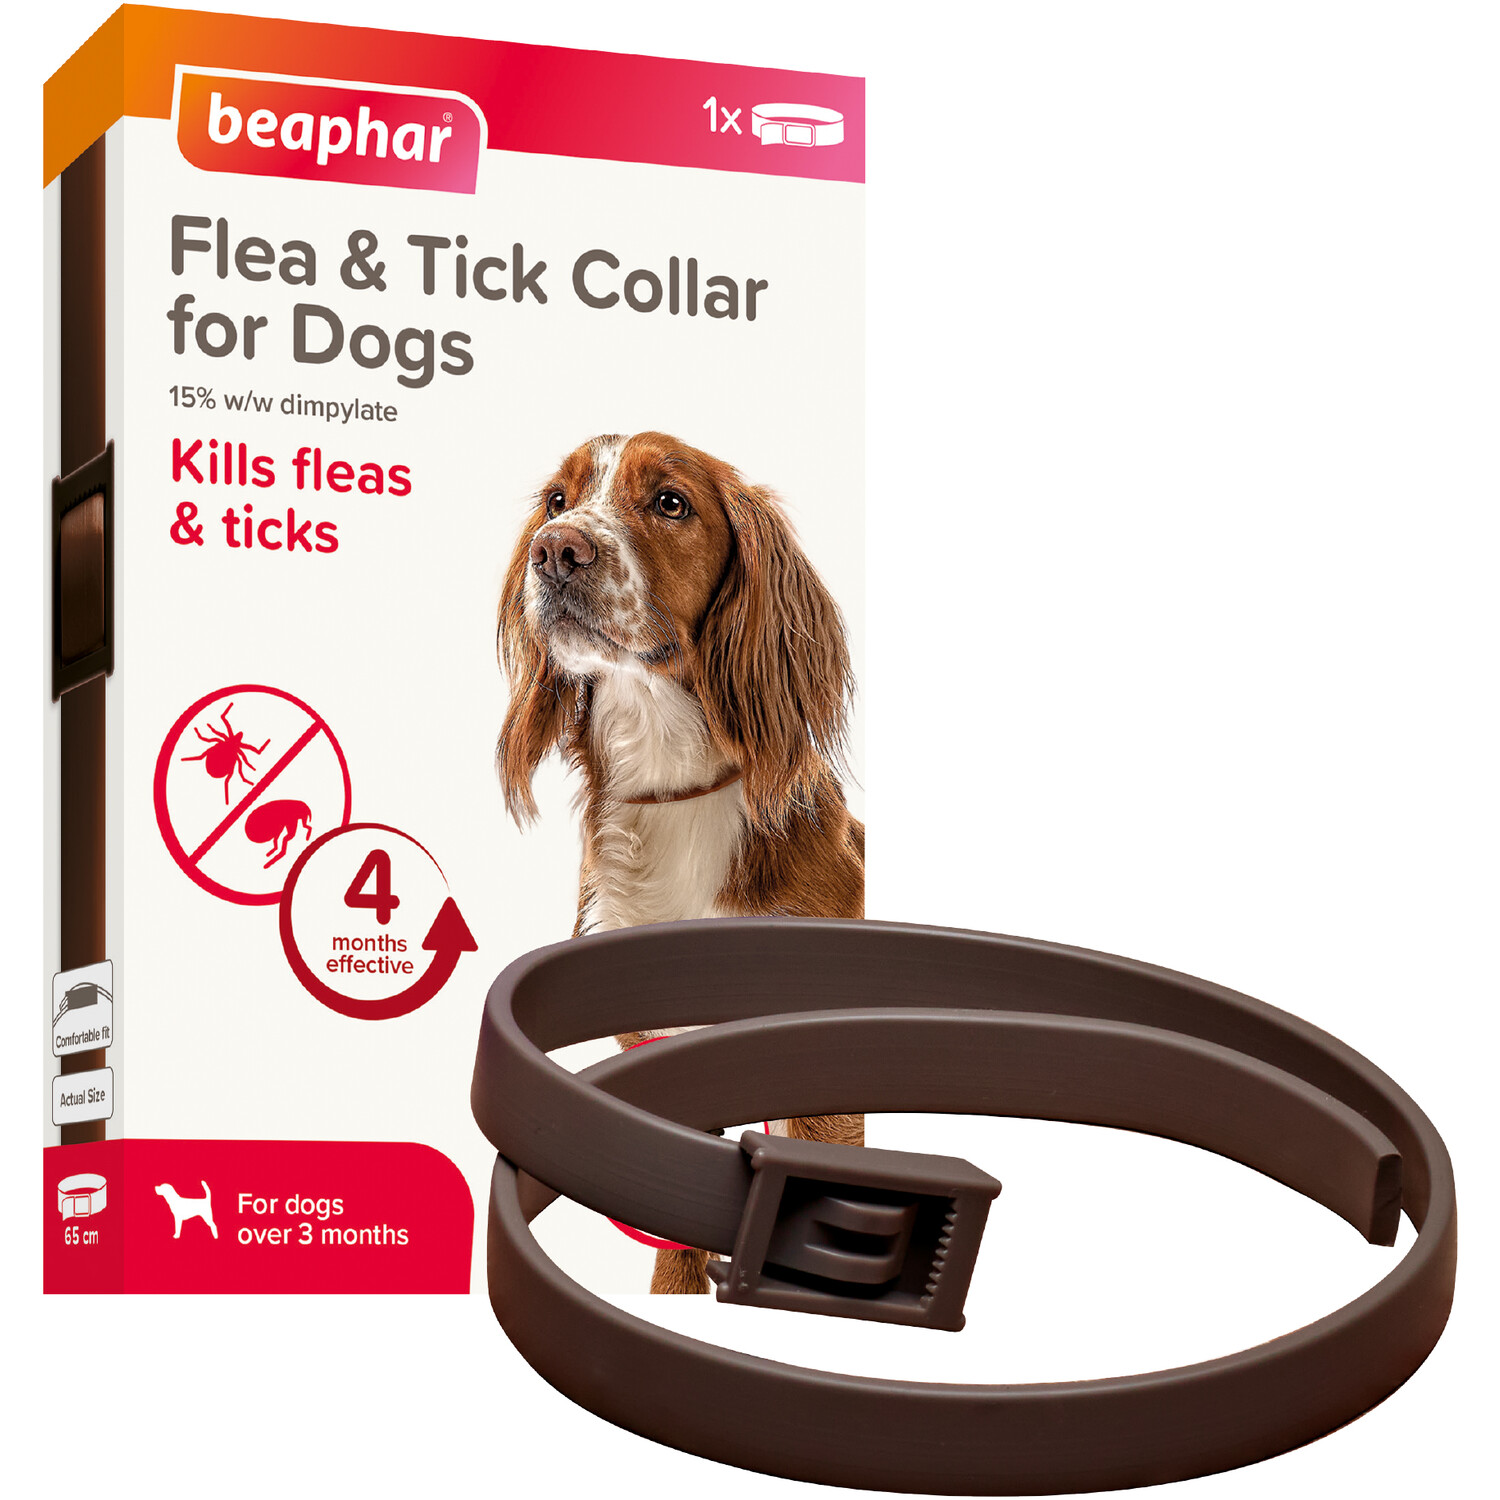 Beaphar Flea and Tick Collar for Dogs - Brown Image 2